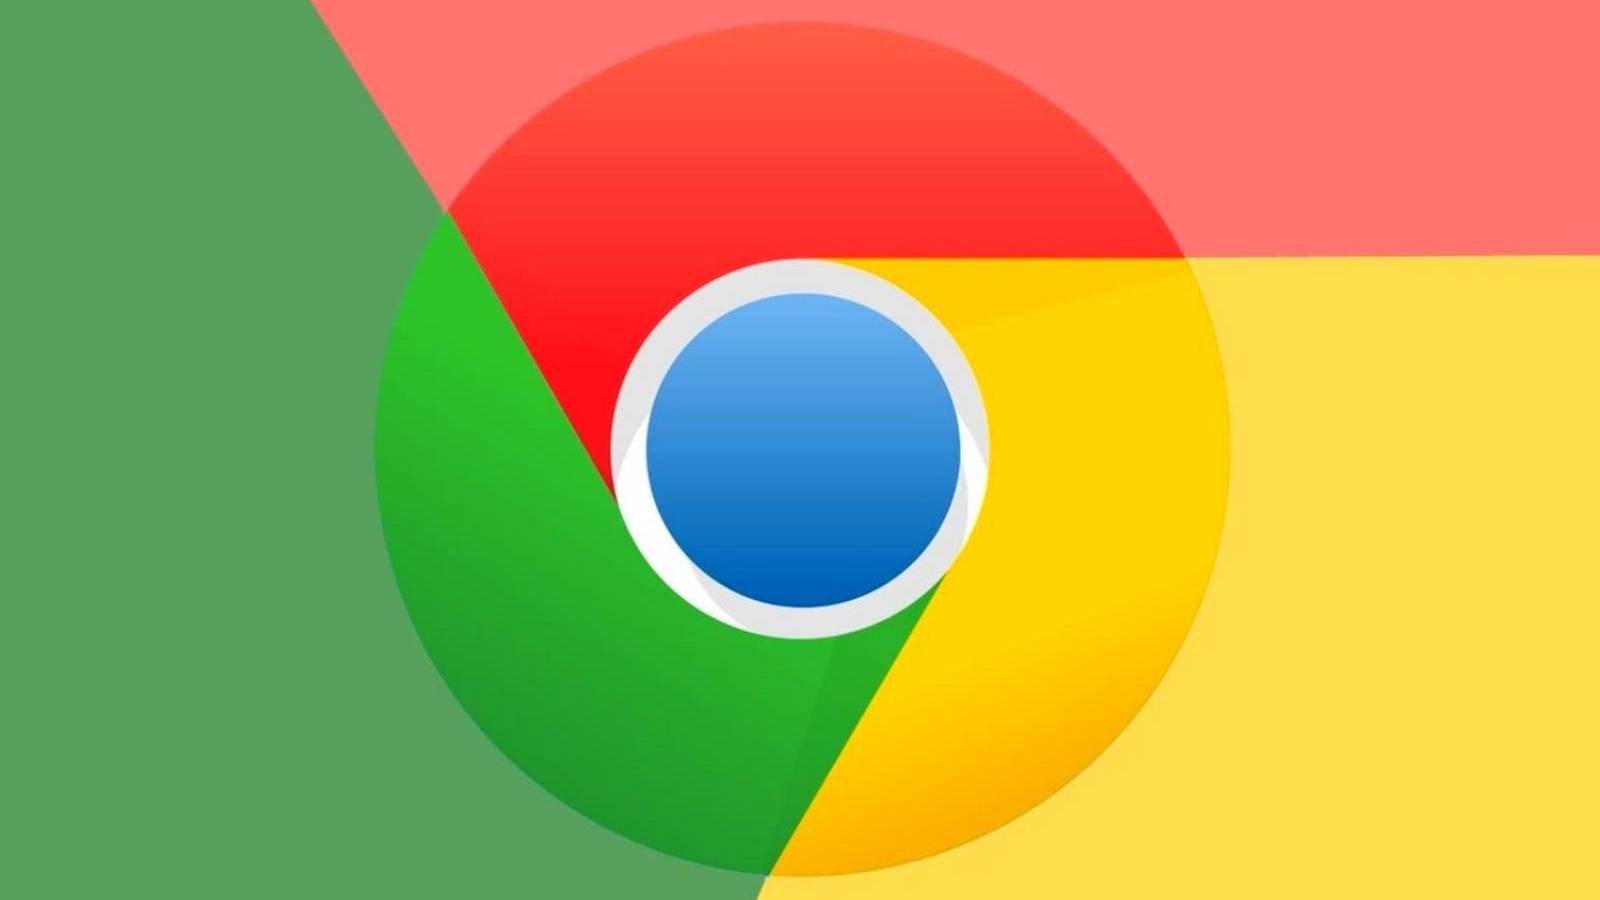 Google Chrome Update Brings New Changes for Phones and Tablets